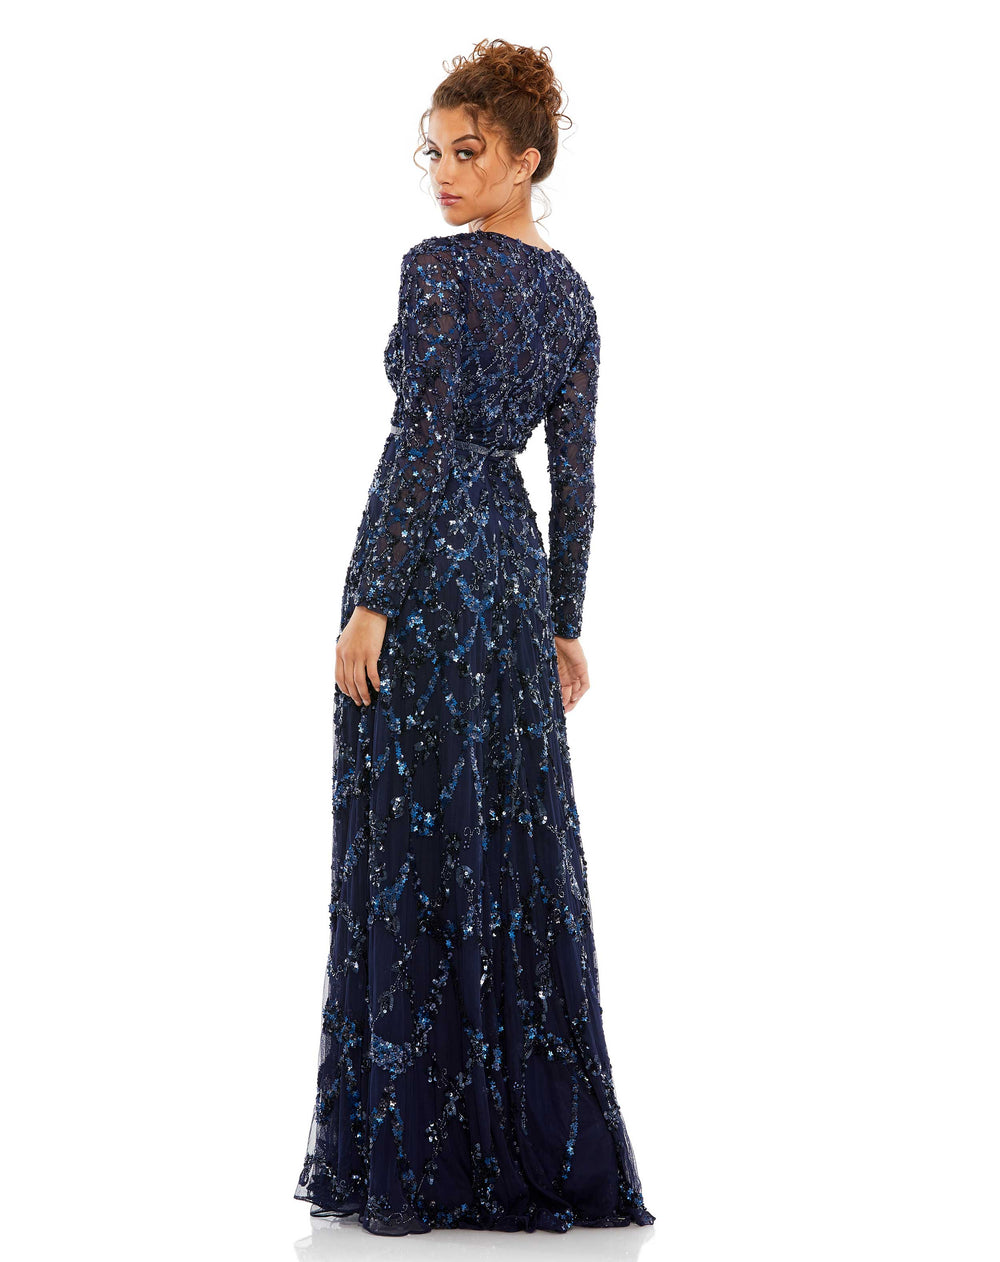 Embellished Illusion High Neck Long Sleeve A Line Gown – Mac Duggal